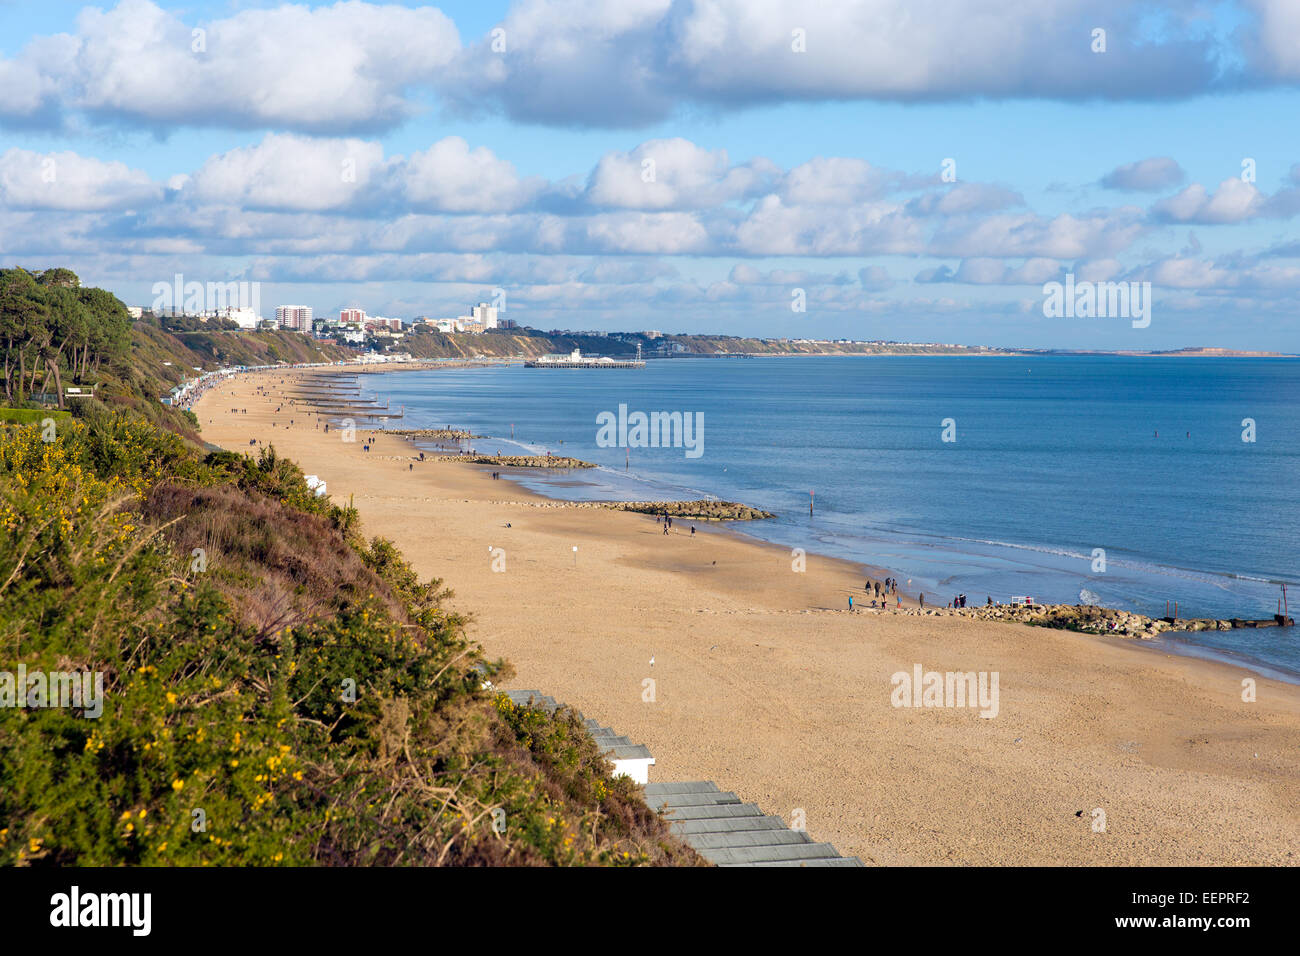 Branksome beach Poole Dorset near to Bournemouth known for beautiful beaches Stock Photo